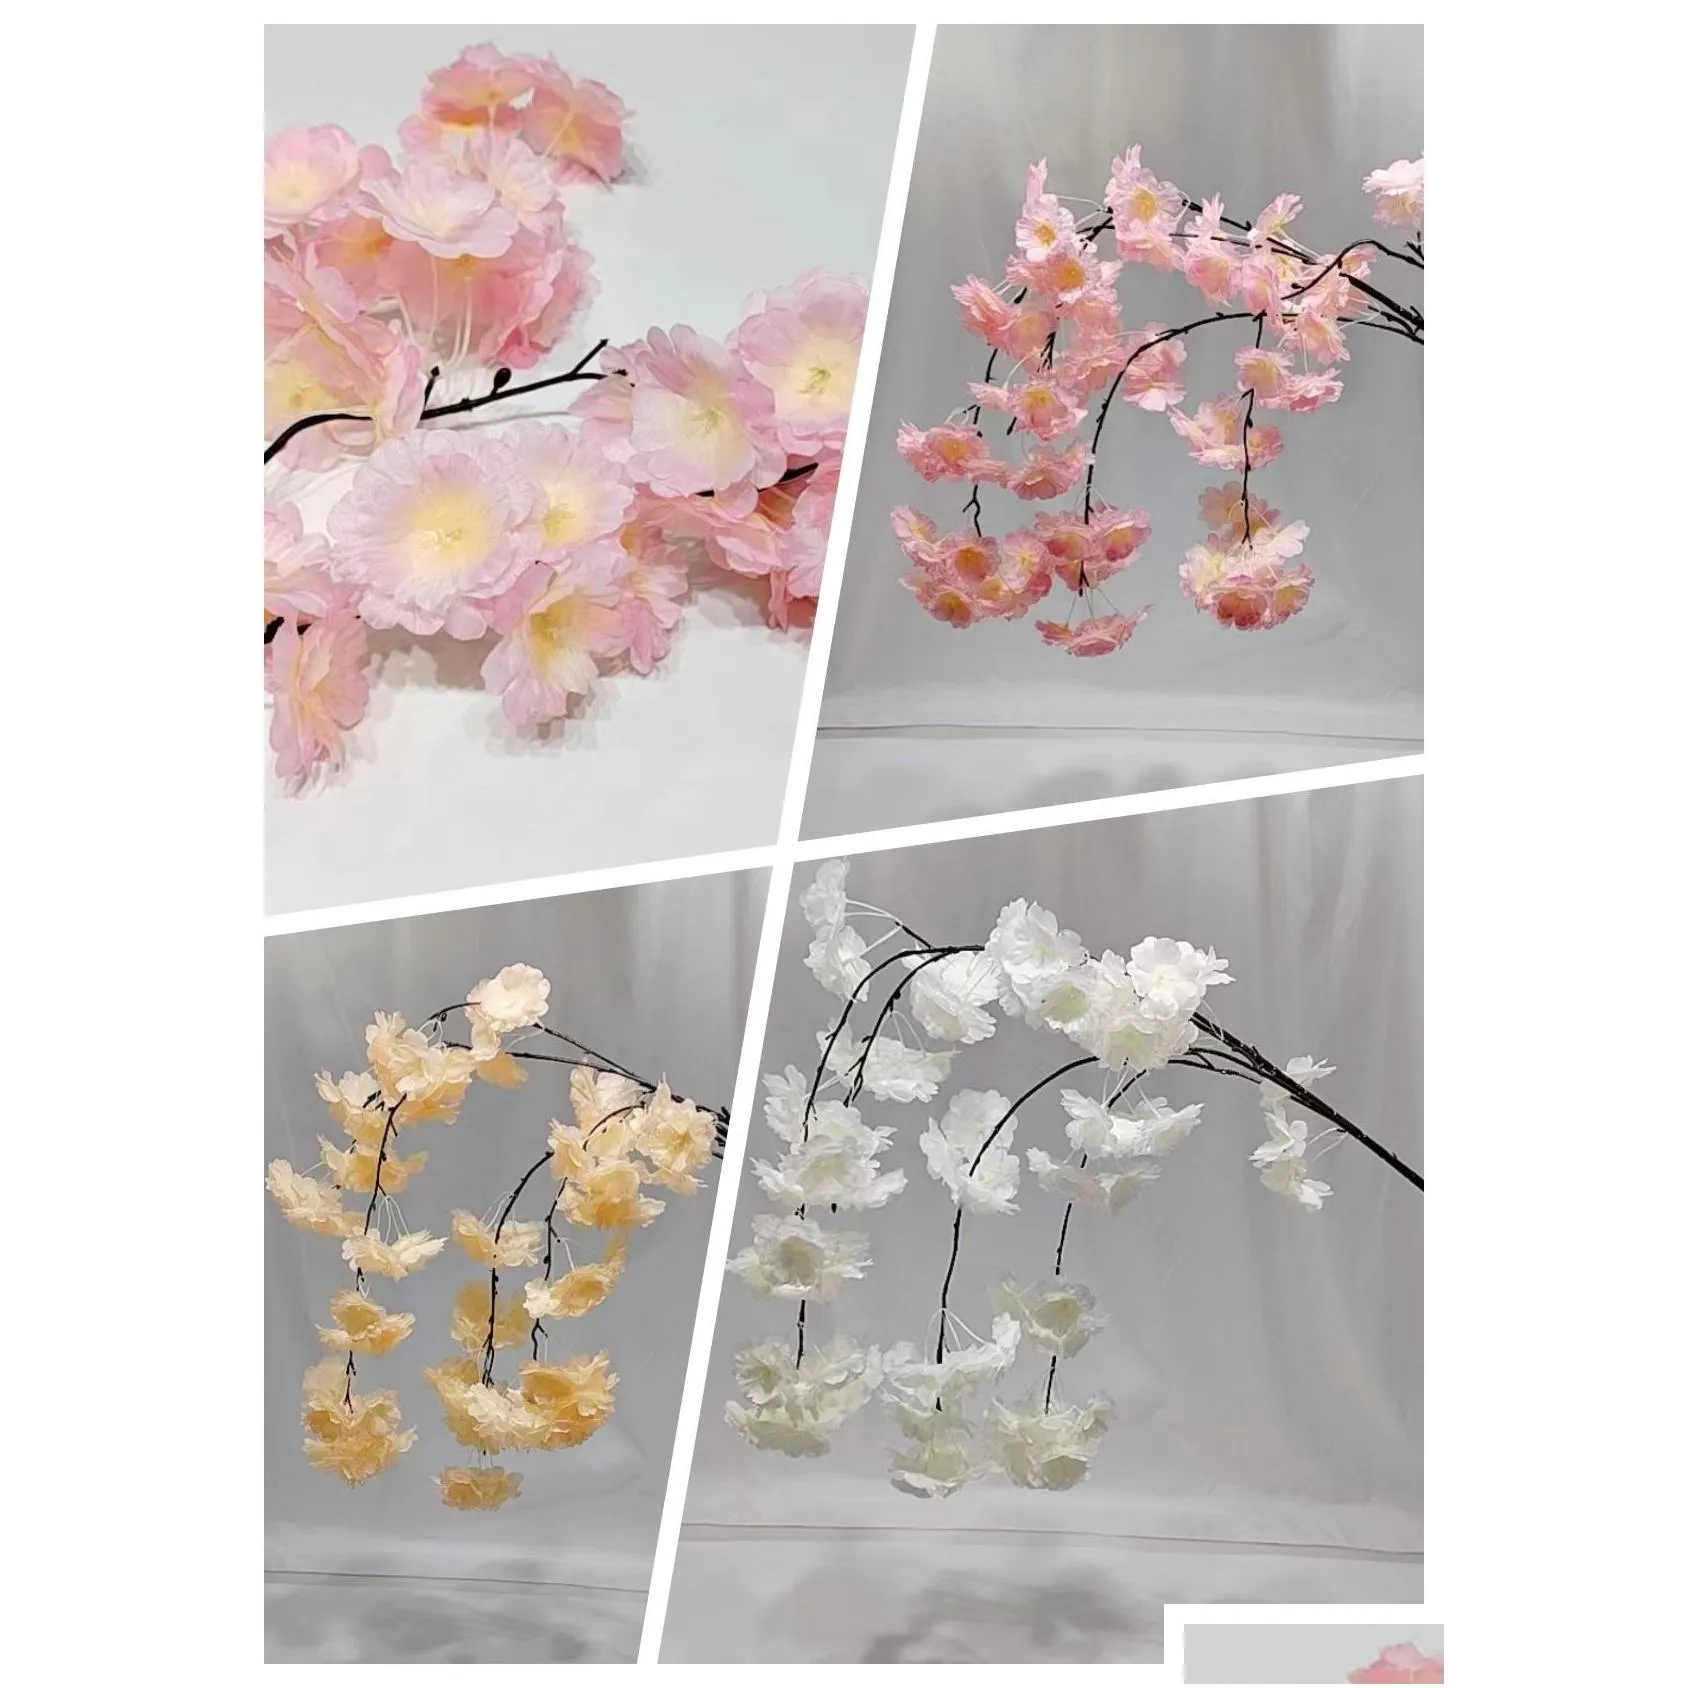 Decorative Flowers Wreaths Artificial Hanging Cherry Blossom Branch For Wedding Home Decoration Drop Delivery Garden Festive Party S Ot54X